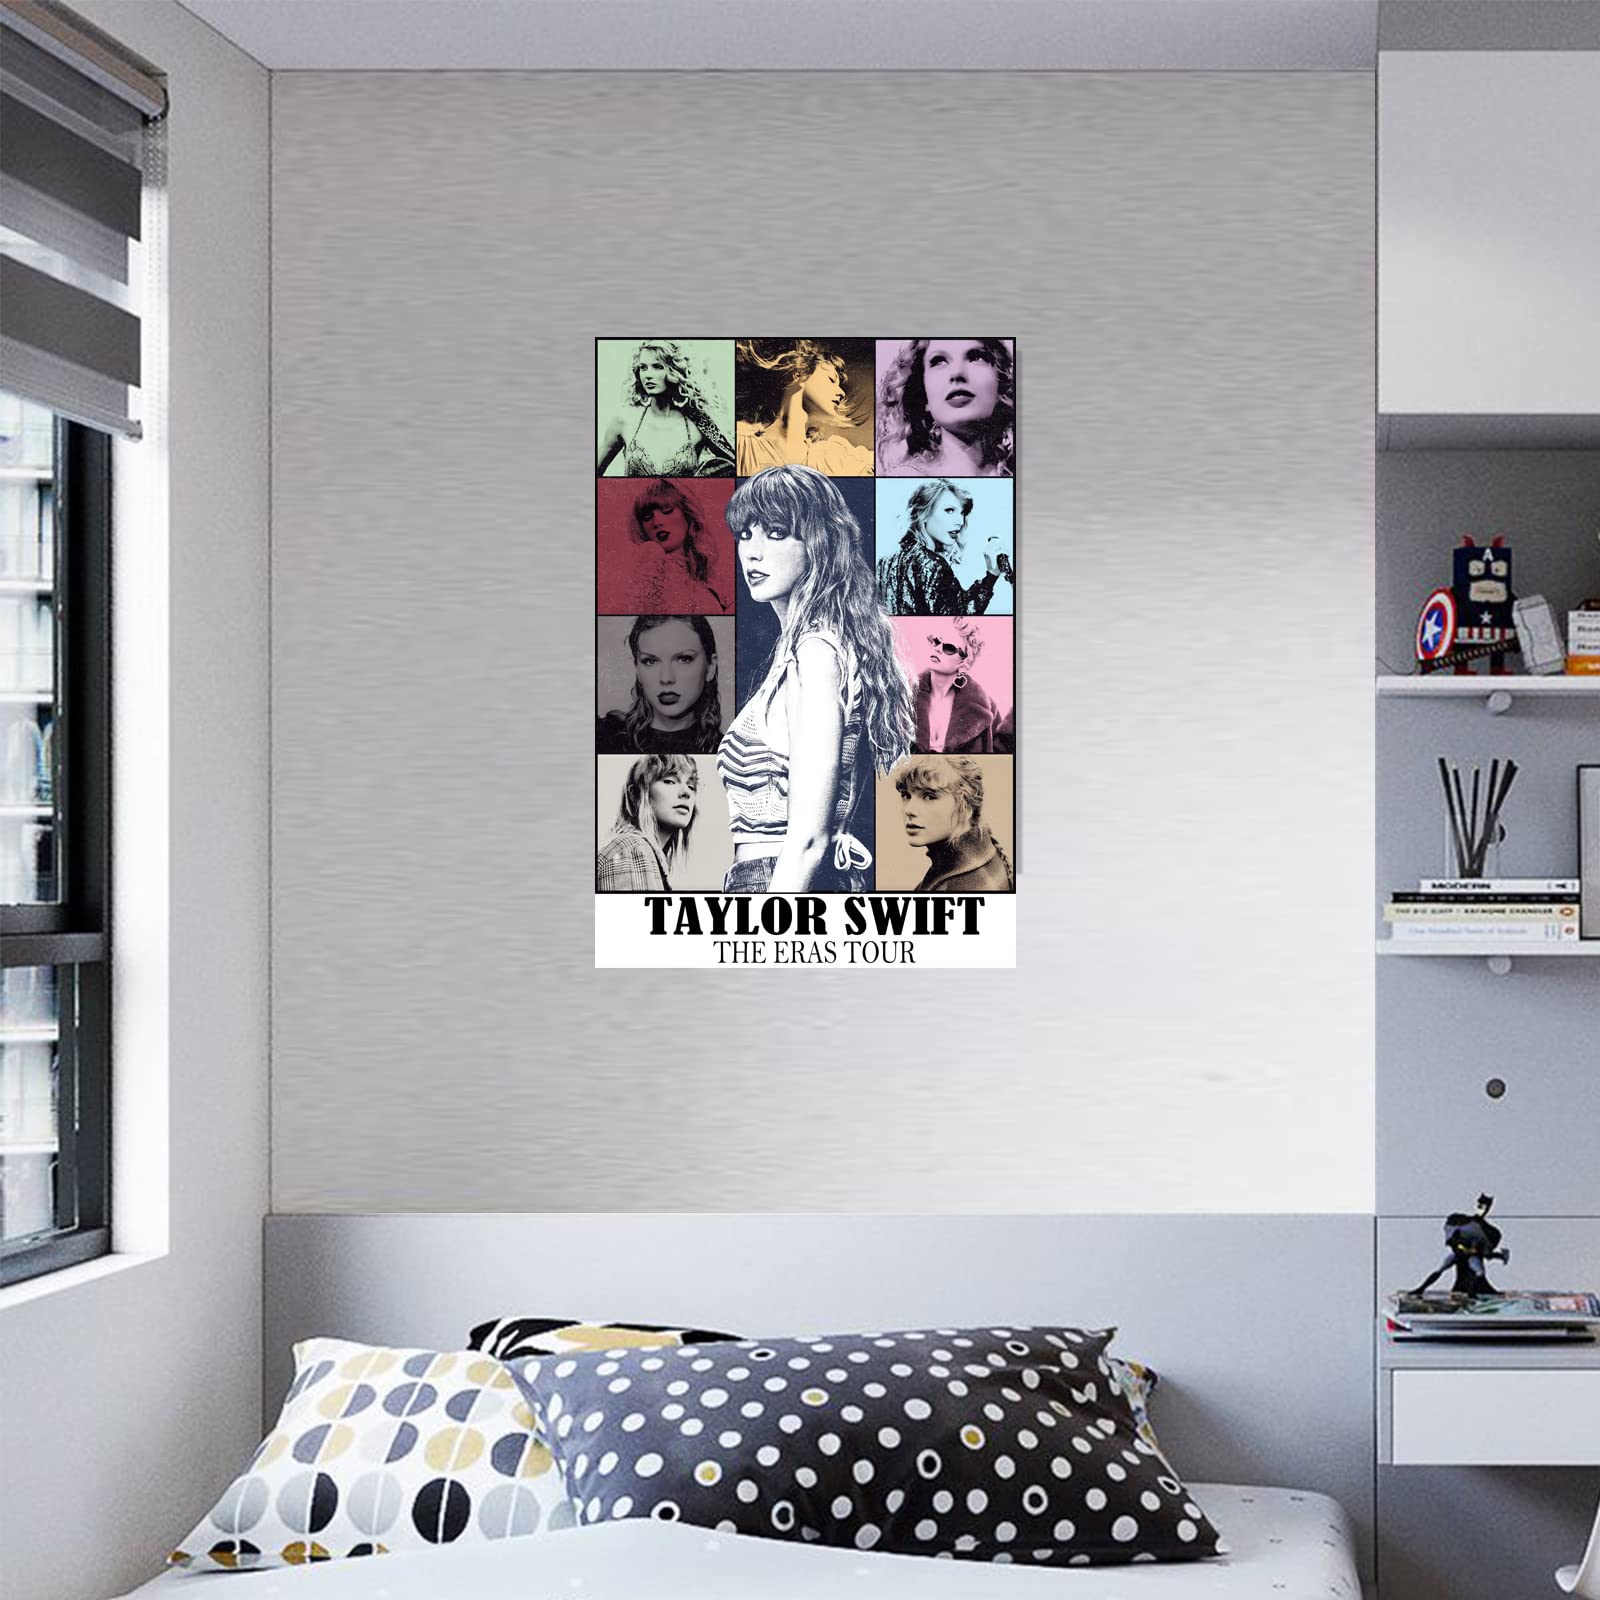 Mua CEKEIOLMLW Vintage taylor Music Midnights Posters for Room ...